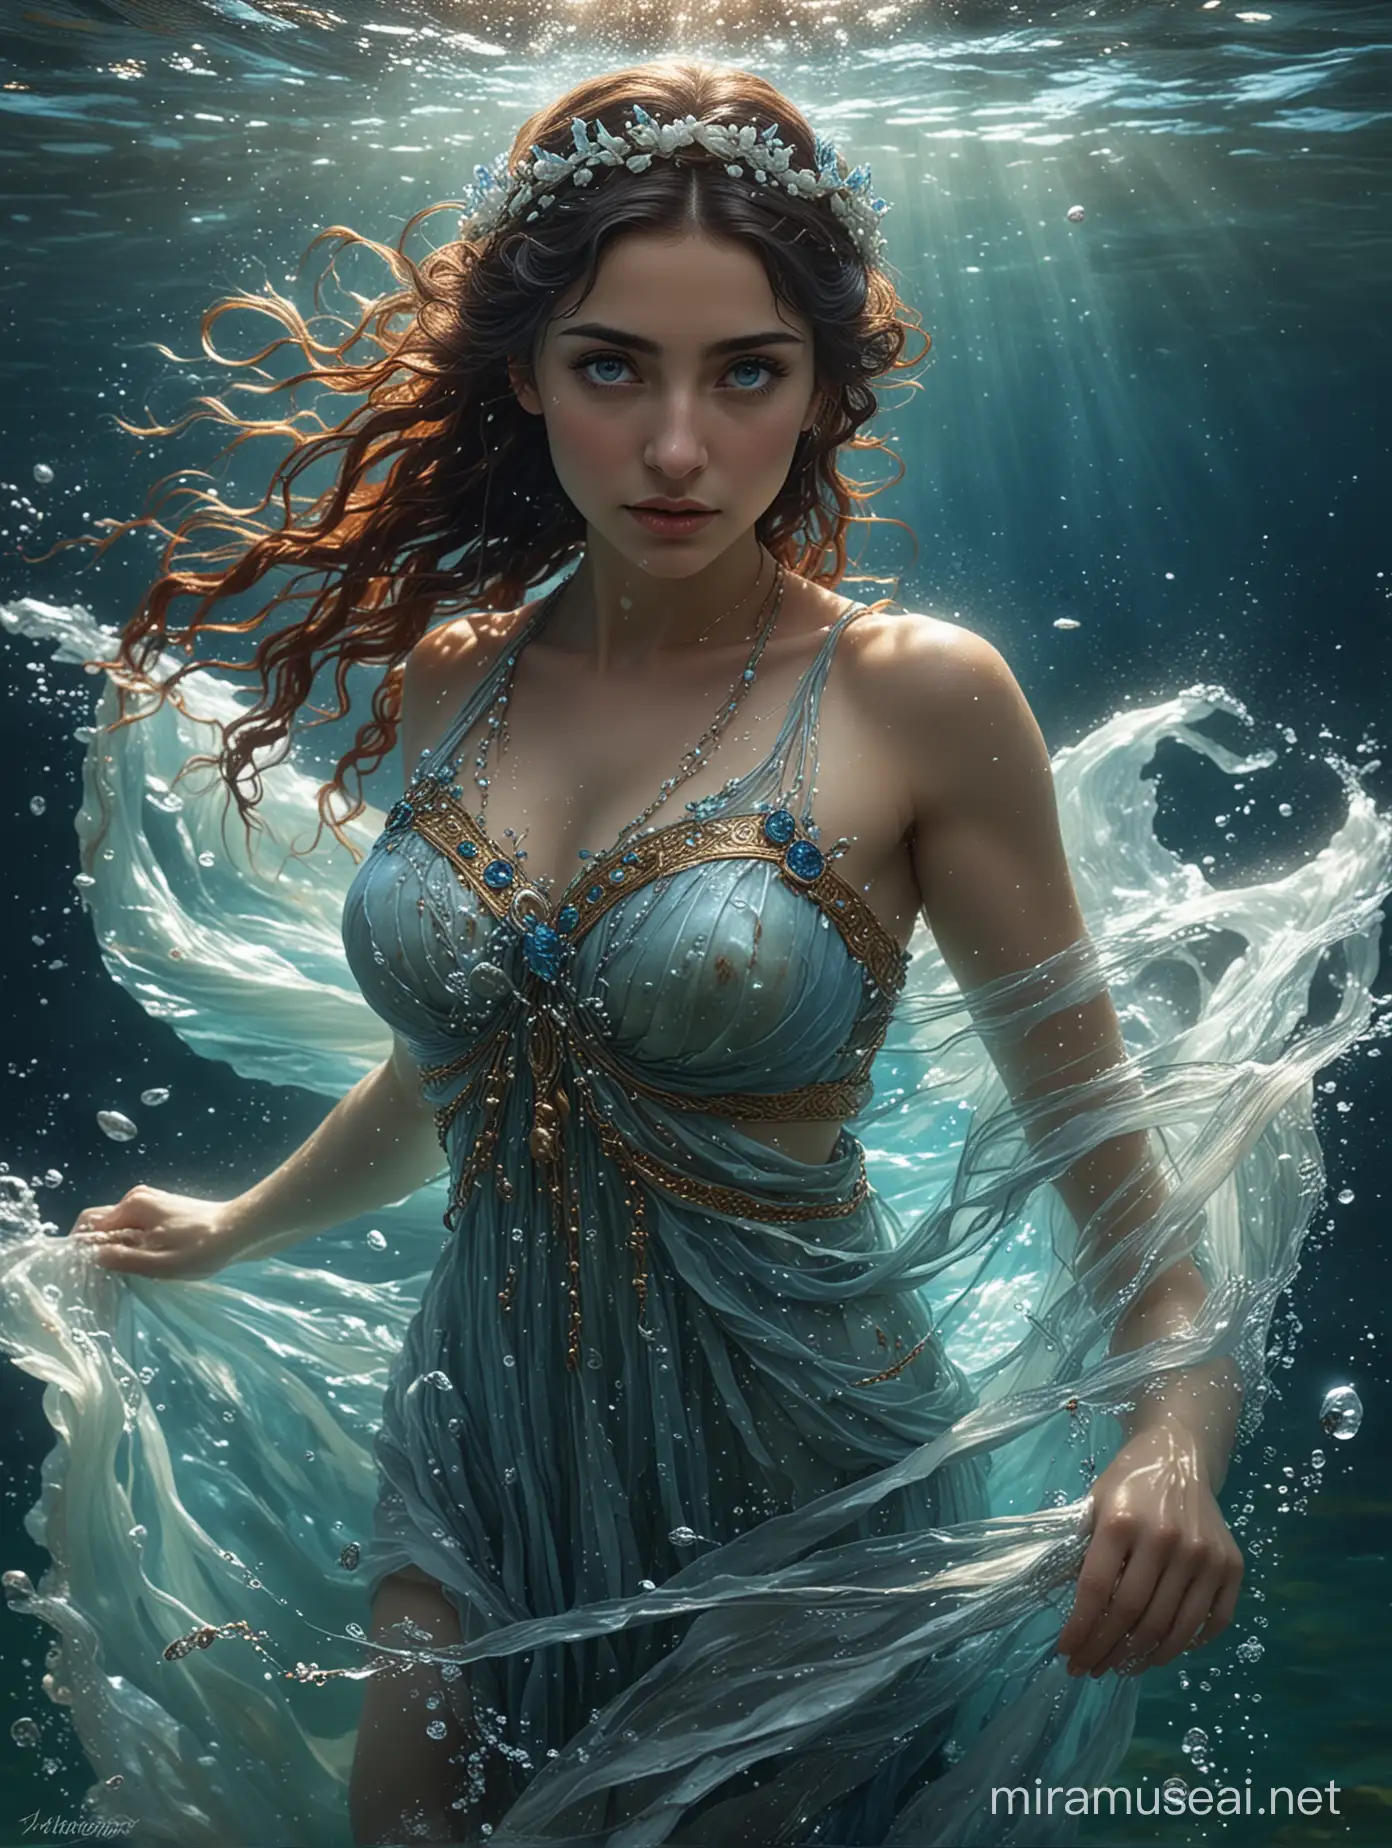 A masterpieced of Kimiya Hosseini as Leucothea, Greek goddess of the sea. She is under the sea, and her Greek dress flows ethereally in the water until it mixes with the water until it disappears. She has has blue eyes. Realistic photo.

